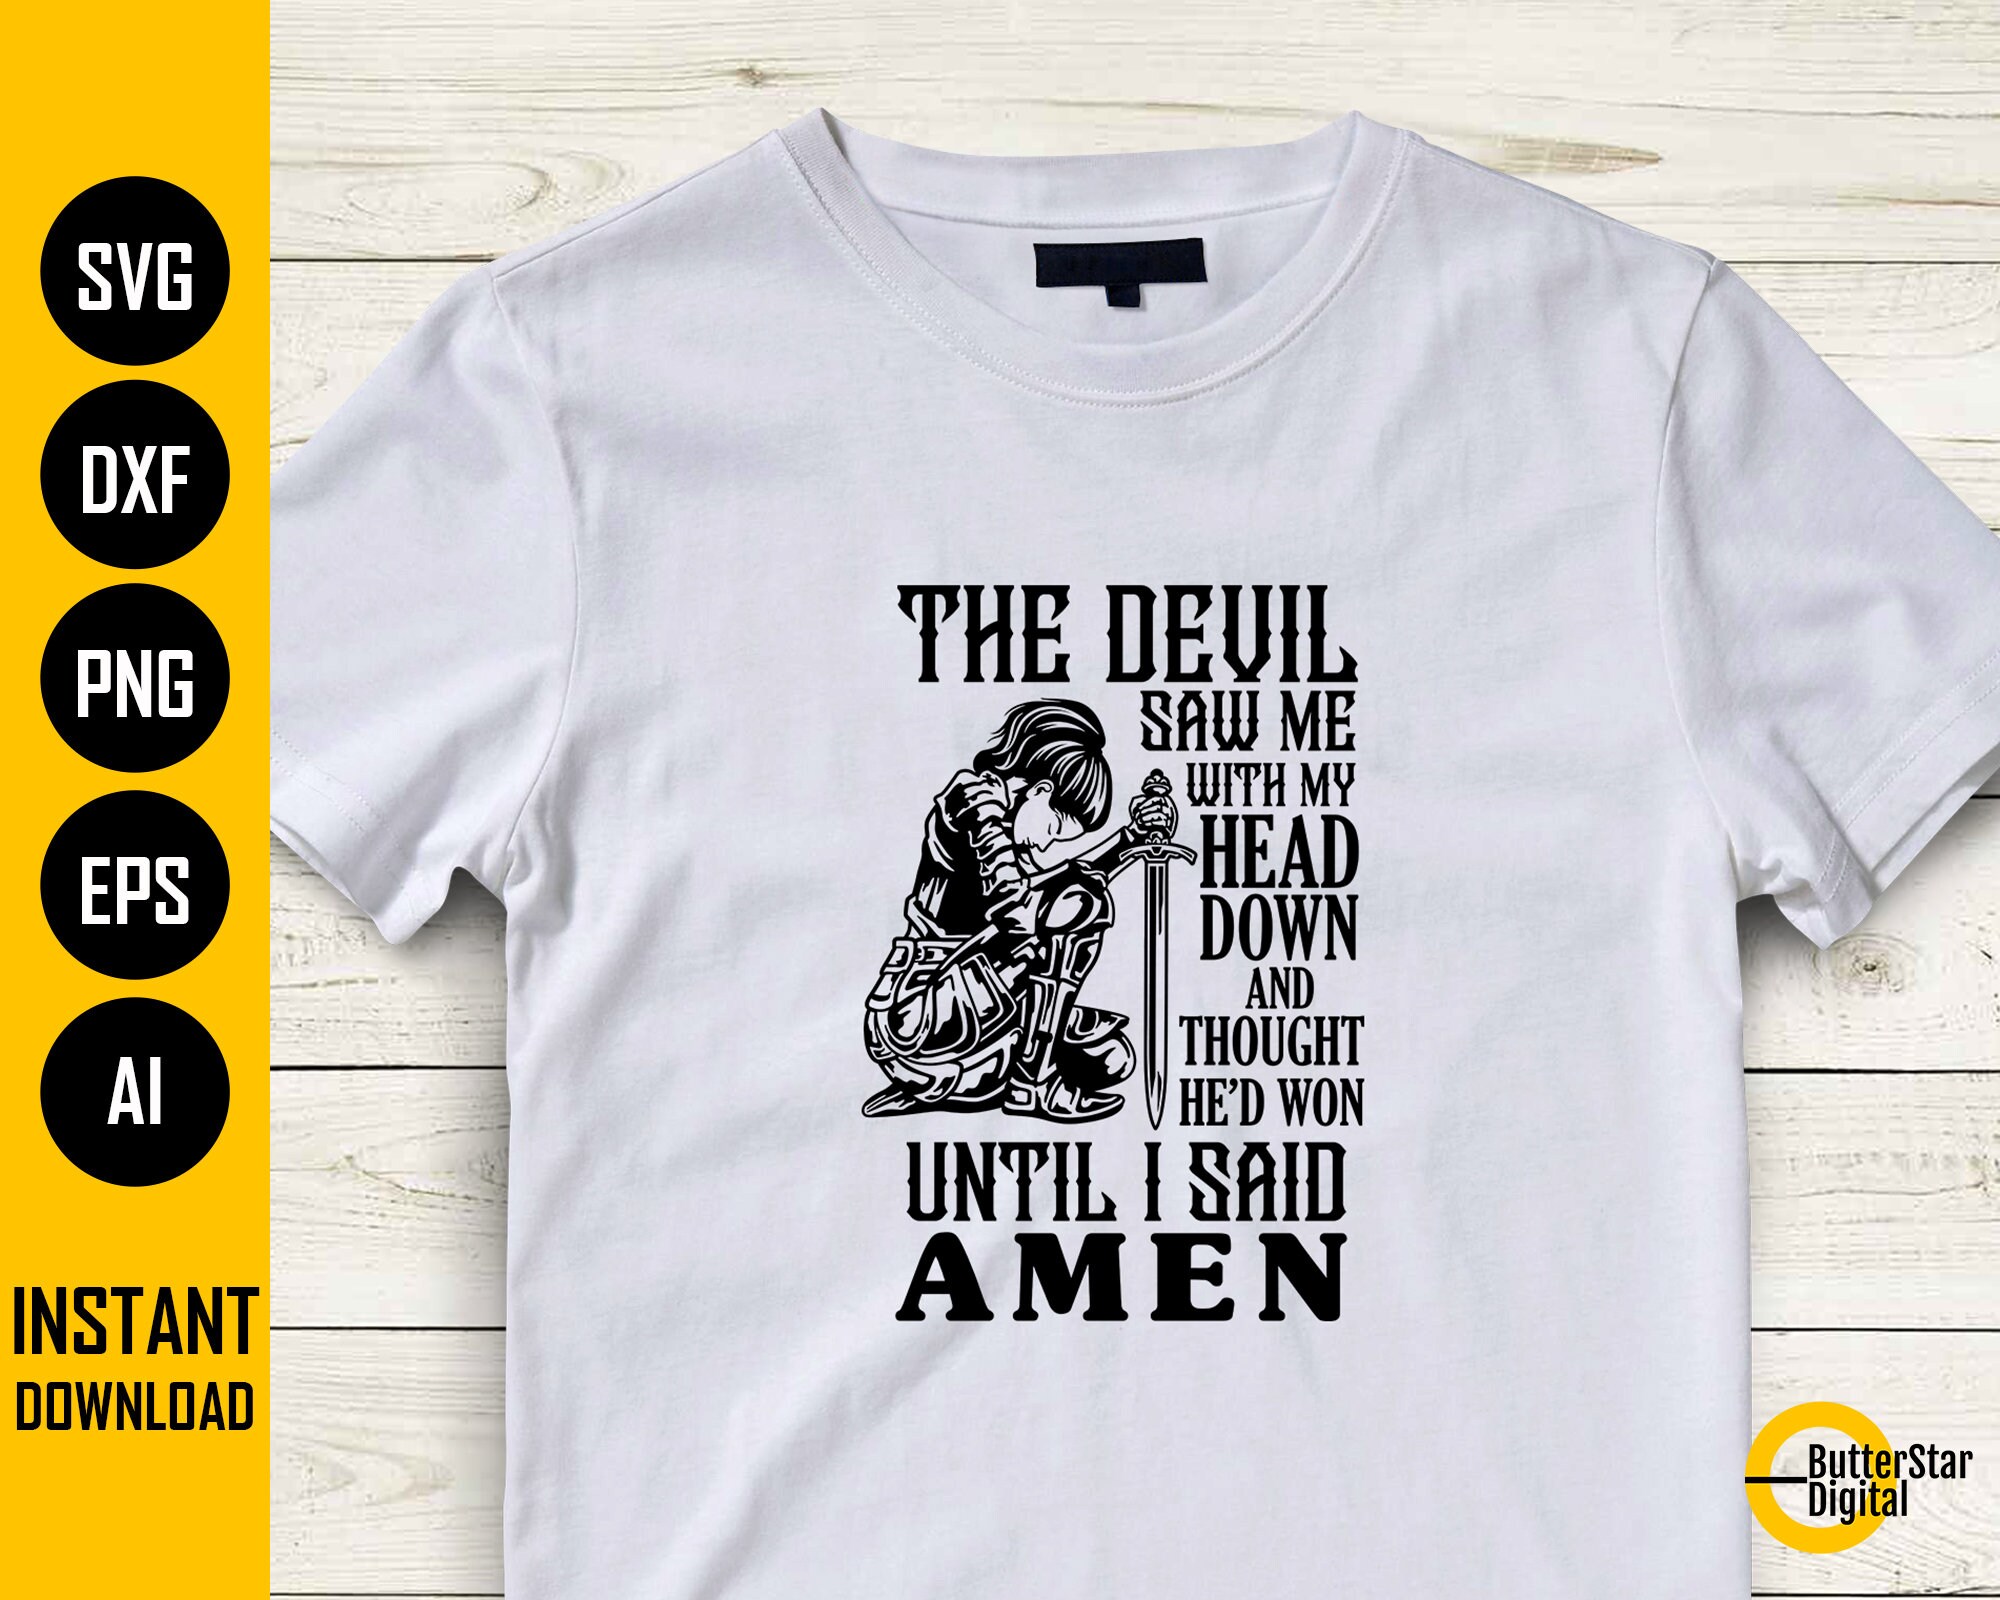 The Devil Saw Me With My Head Down and Thought He'd Won Until I Said Amen  SVG T-shirt Decal Cut File Clip Art Vector Digital Dxf Png Eps Ai - Etsy